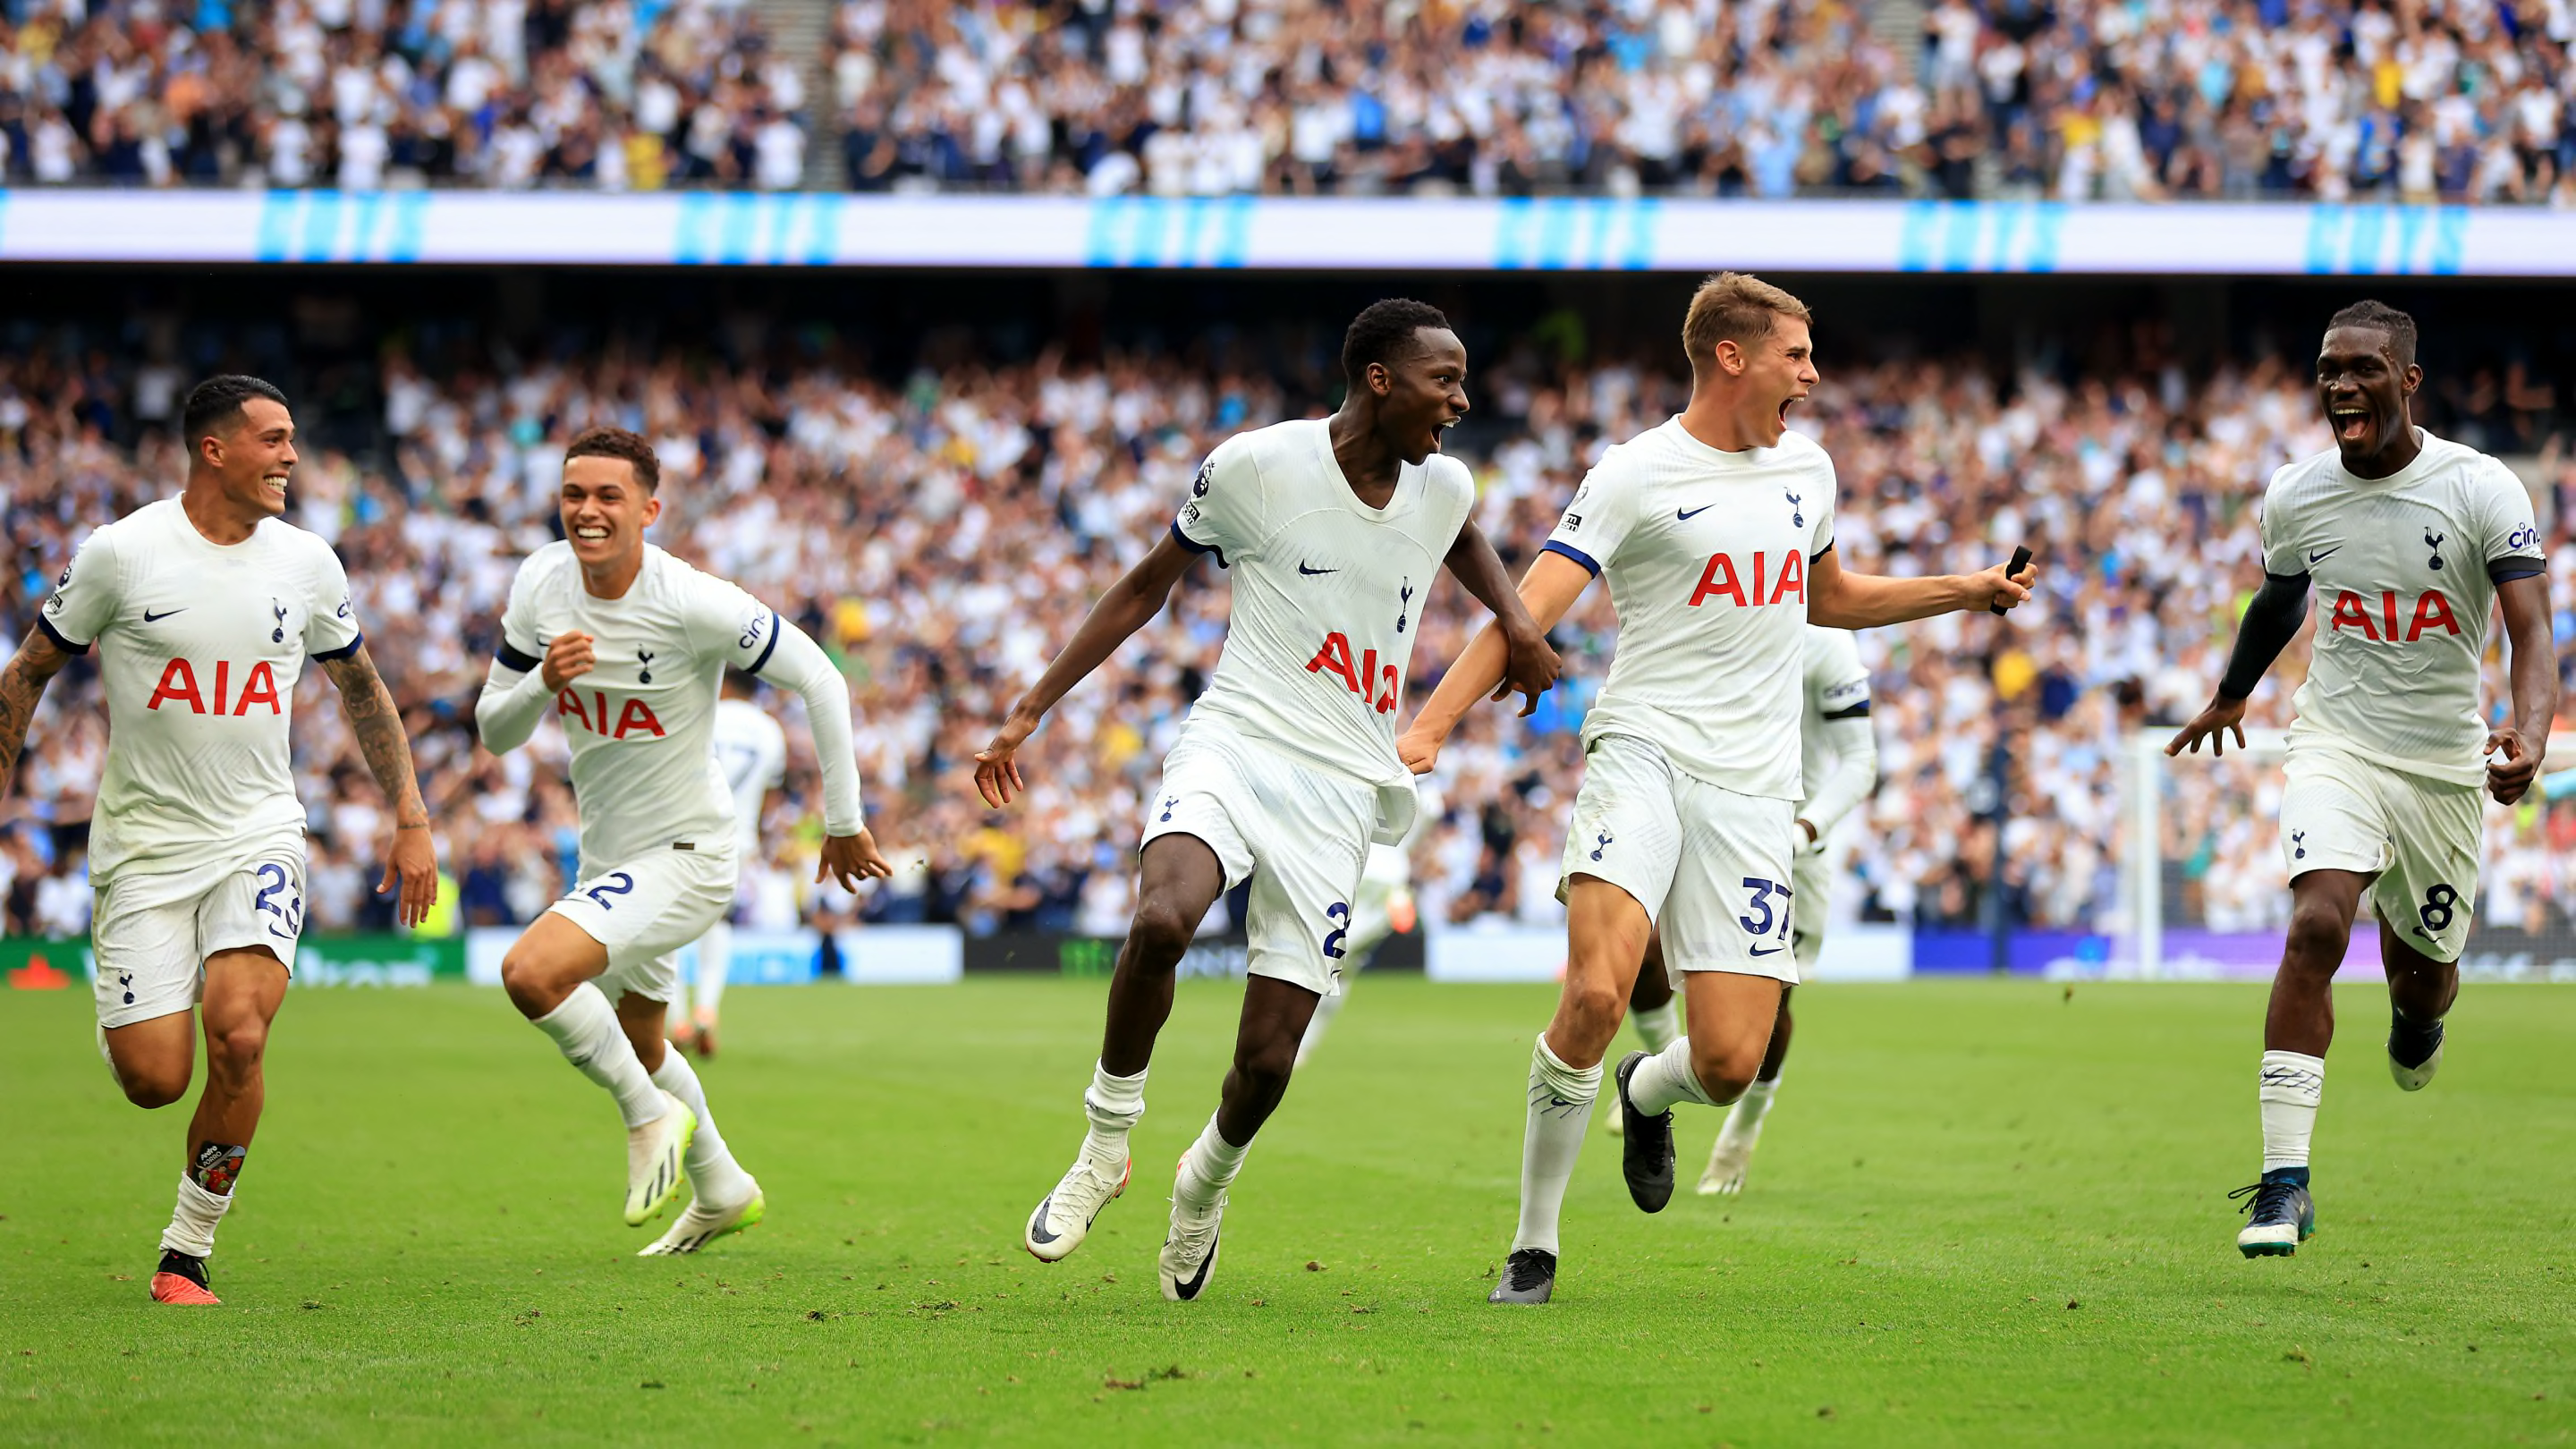 Tottenham 2023/24 season review: Top scorers, assists & player of the year